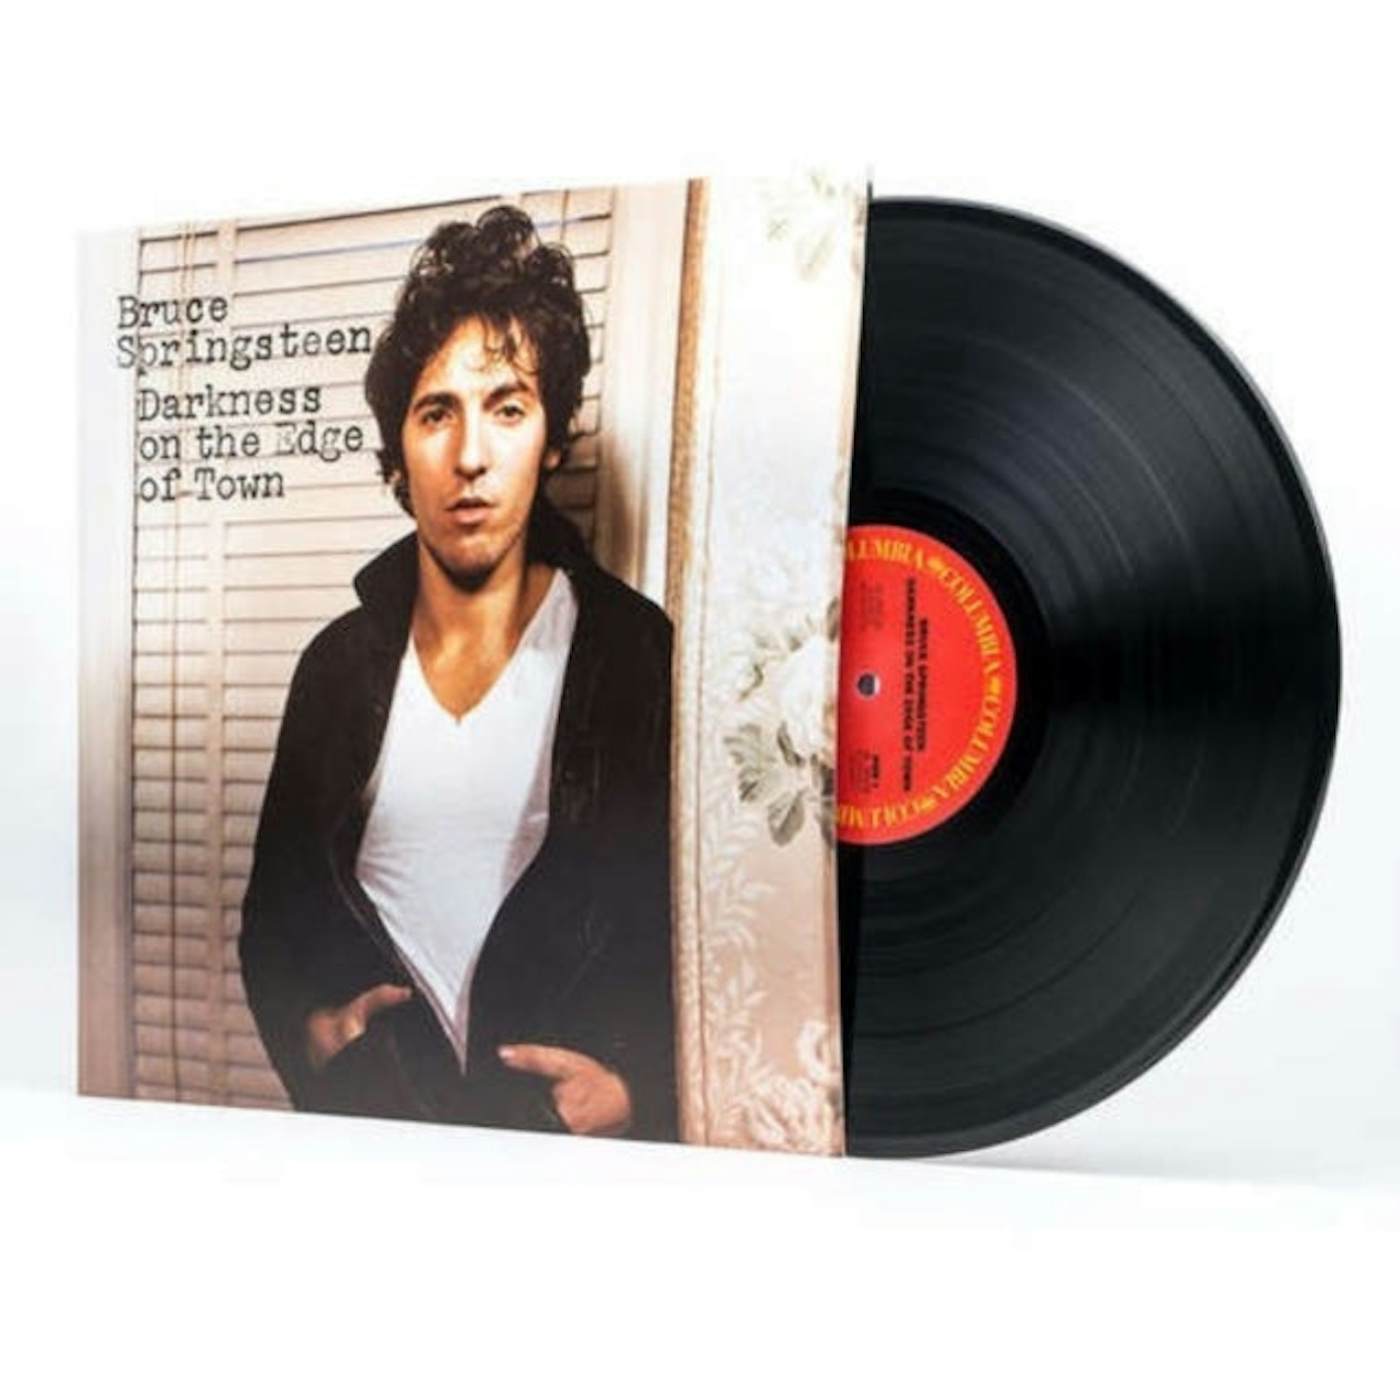 Bruce Springsteen LP Vinyl Record - Darkness On The Edge Of Town